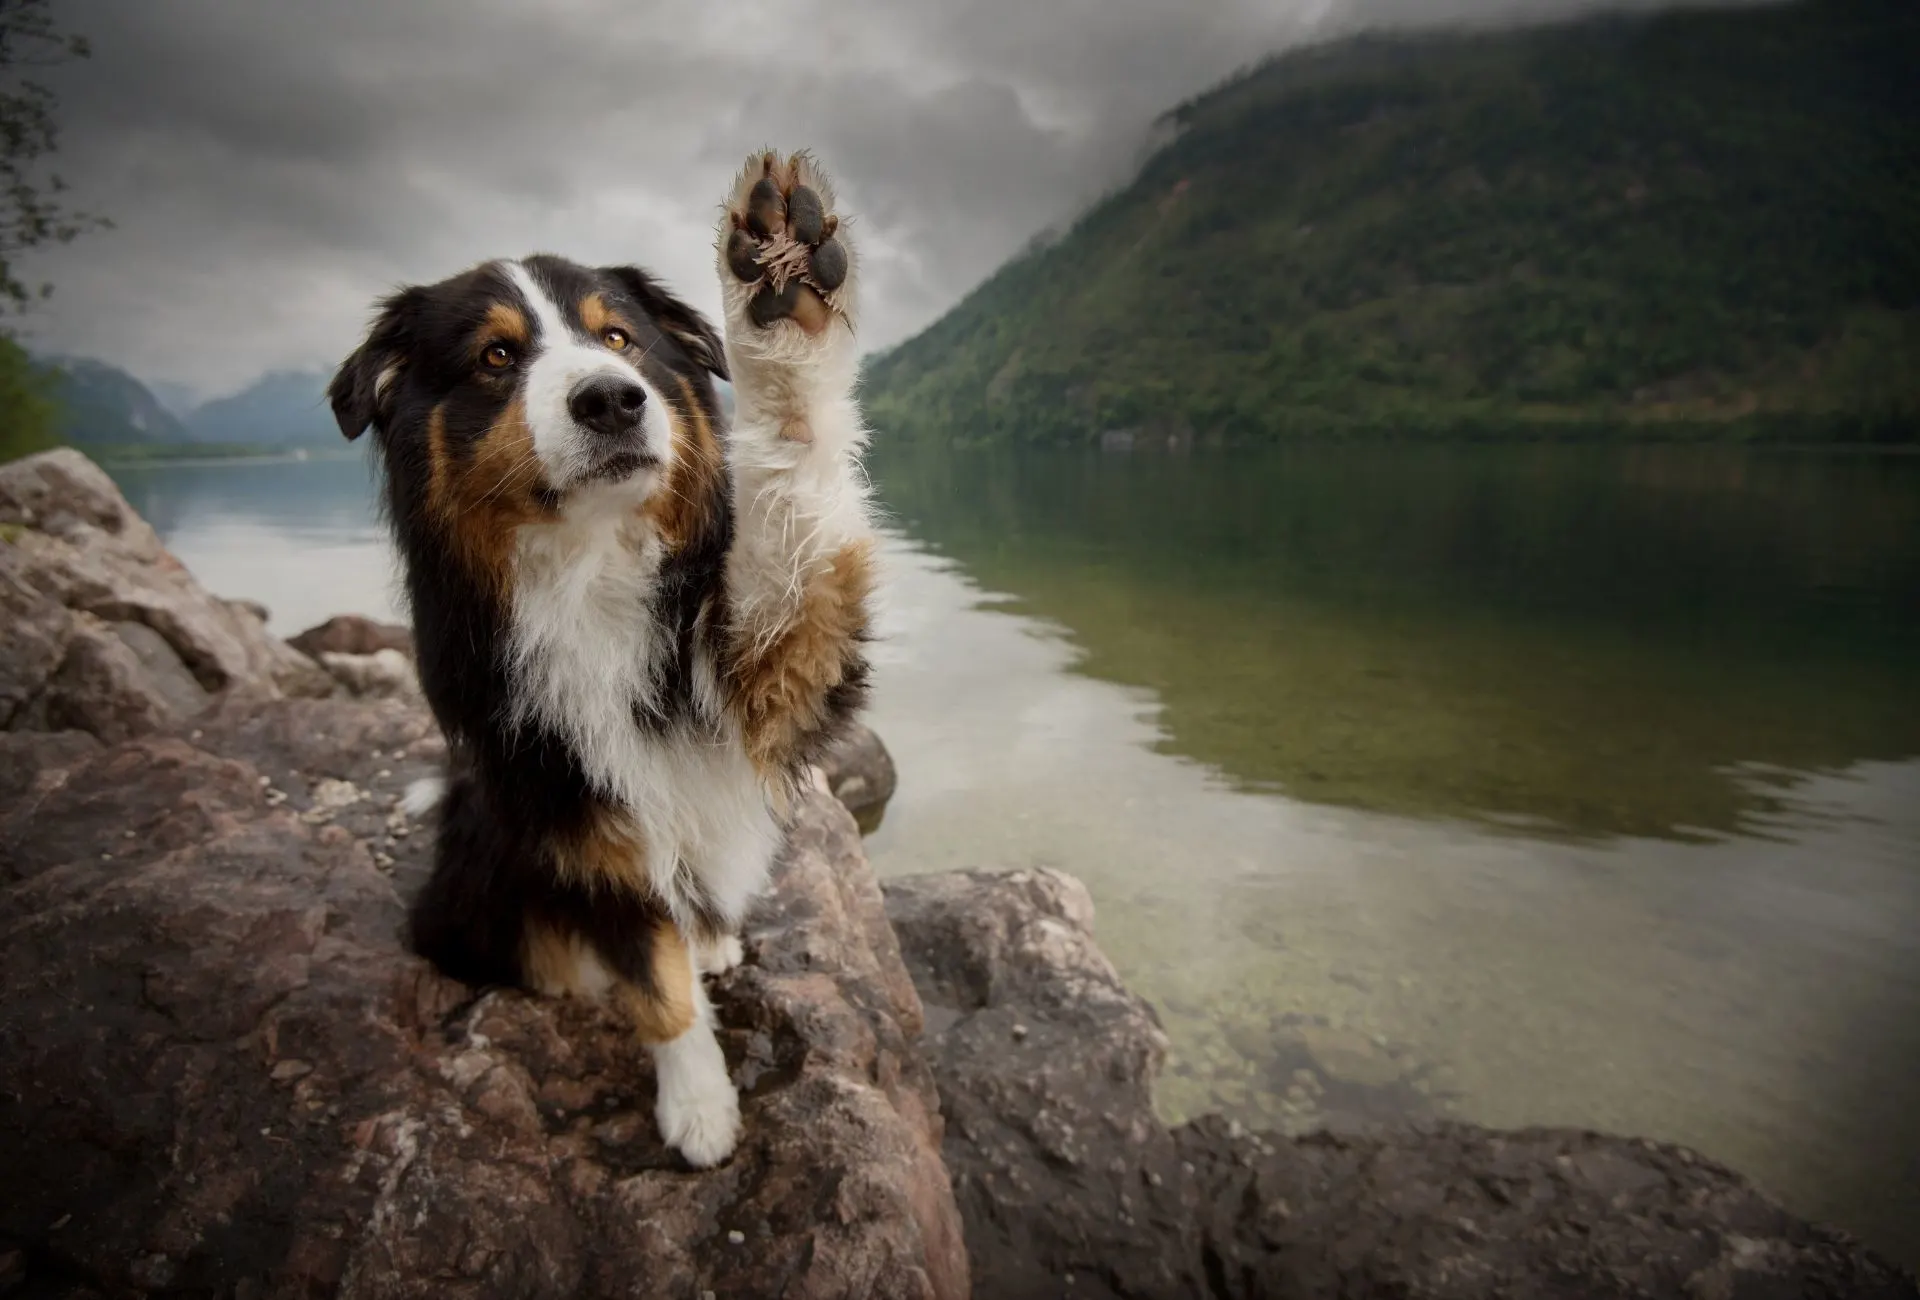 The tricolor dog waves his paw as he sits on a rock in front of a lake.